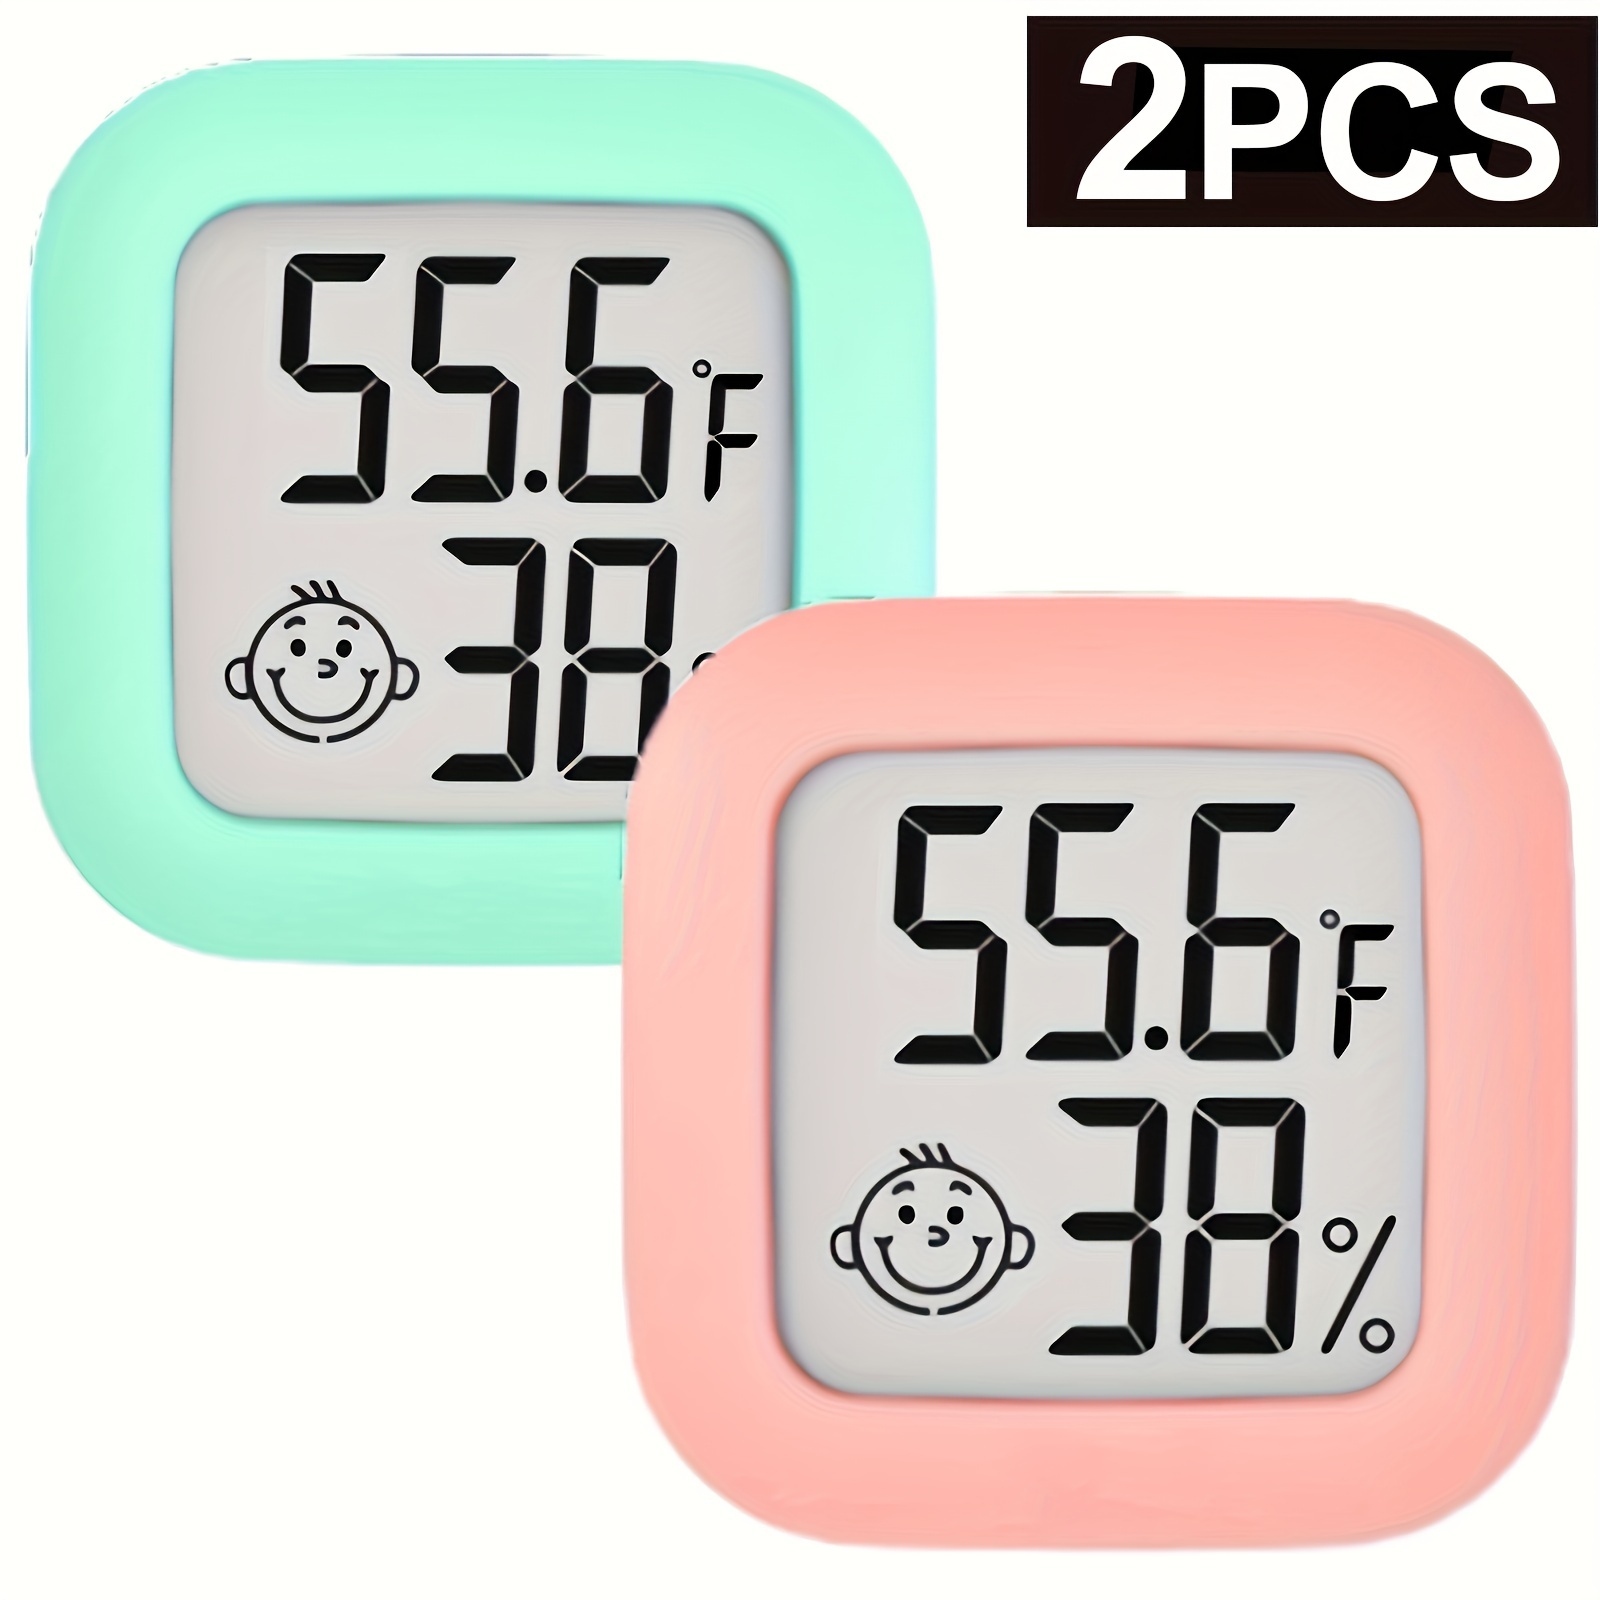 Vaikby Indoor Thermometer 2Pack, Humidity Gauge Meter Digital Hygrometer  Room Thermometer for Home, Hight Accurate Temperature and Humidity Monitor